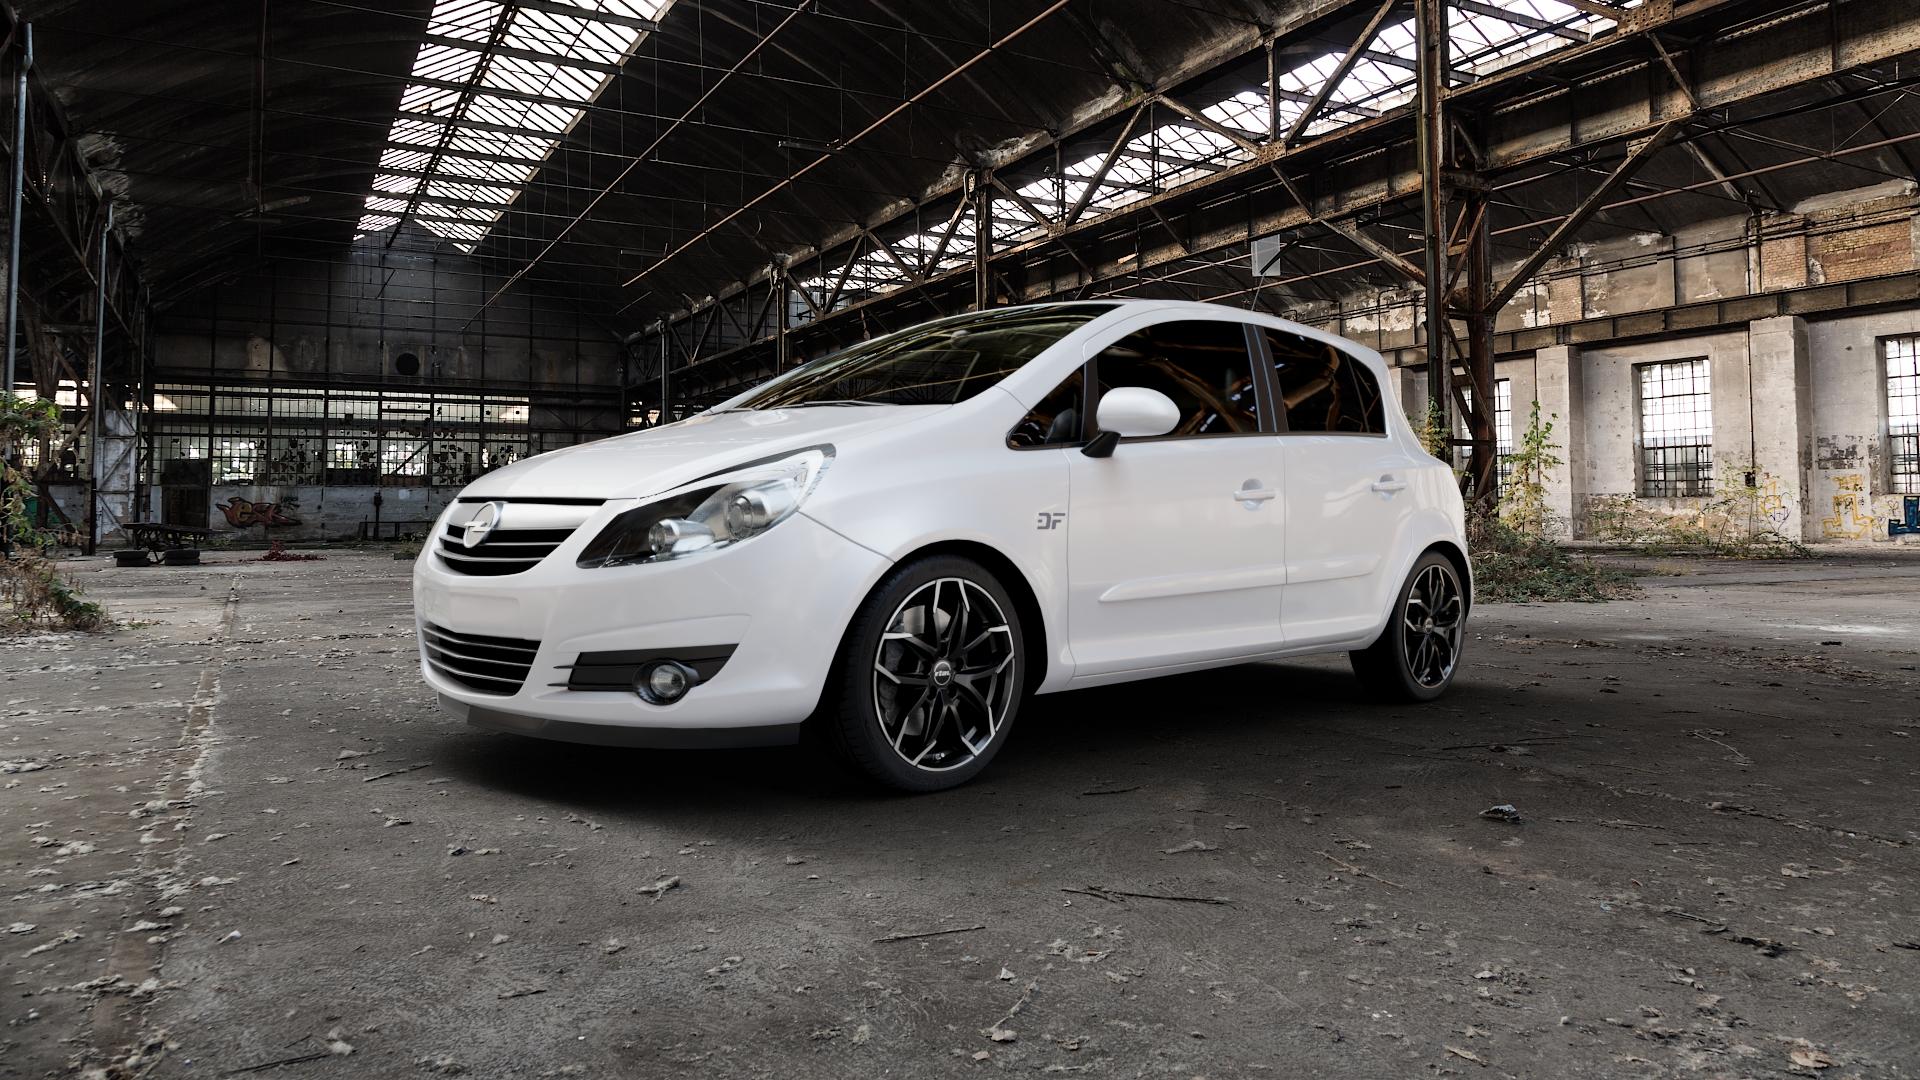 Opel Corsa D Type S-D 1,2l 51kW (69 hp) Wheels and Tyre Packages |  velonity.com